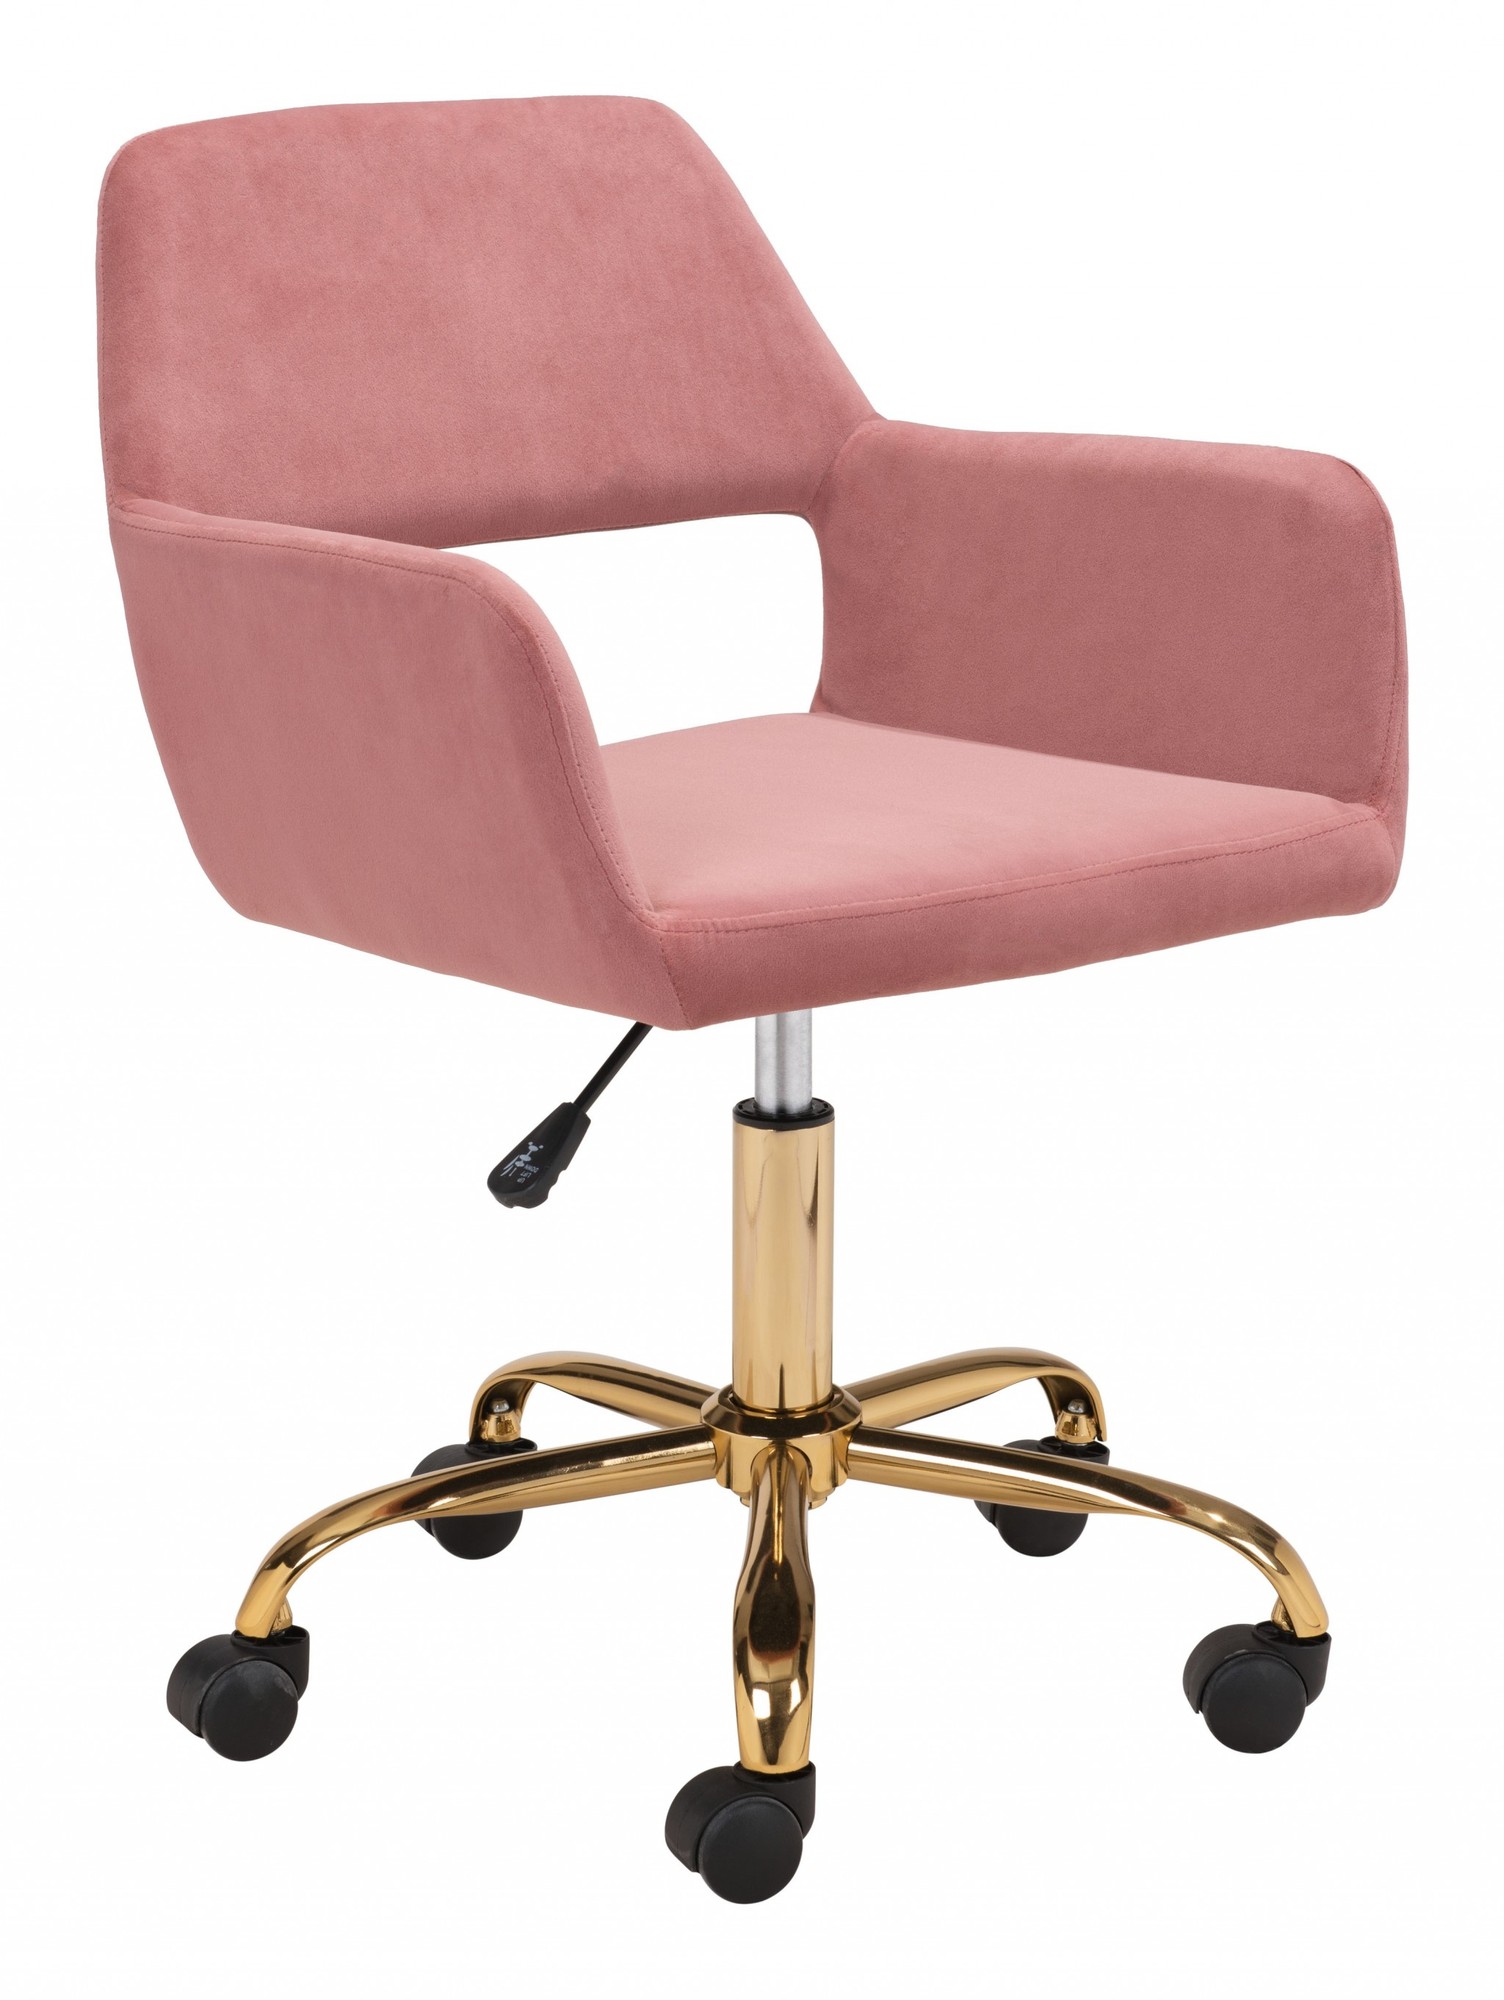 Boho Glam Pink and Gold Rolling Office Chair